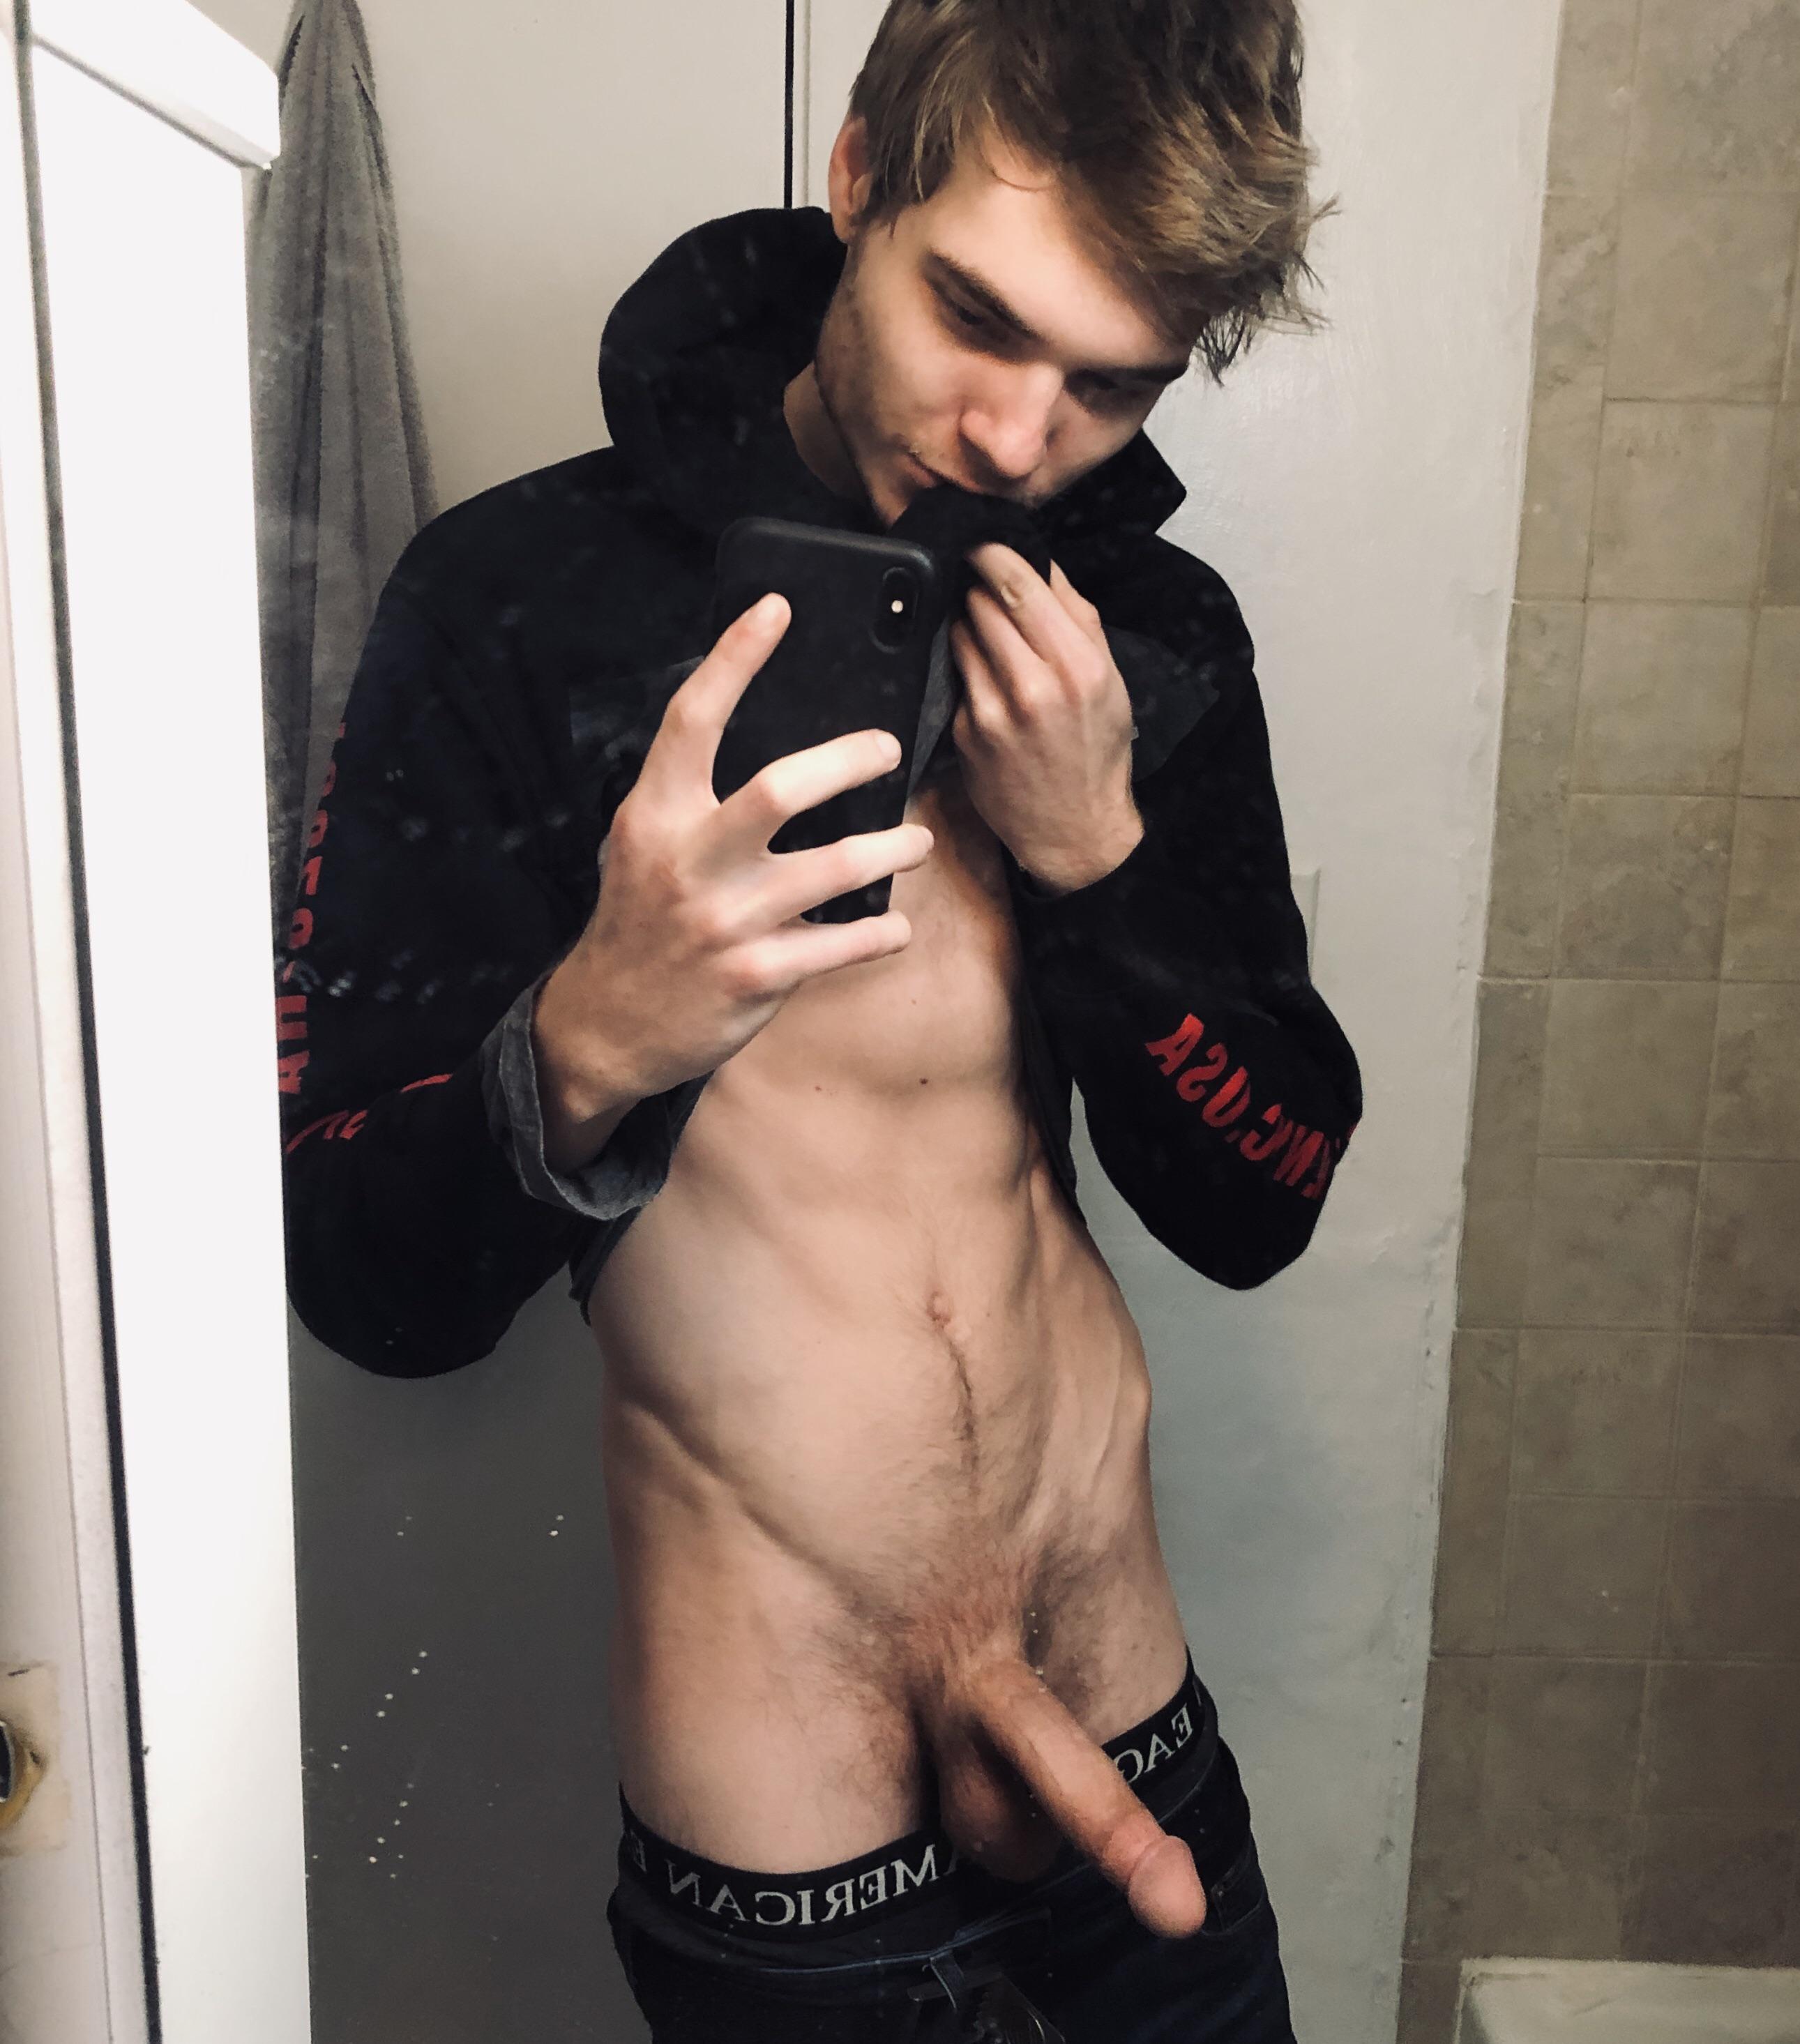 Selfie boy with a long dick